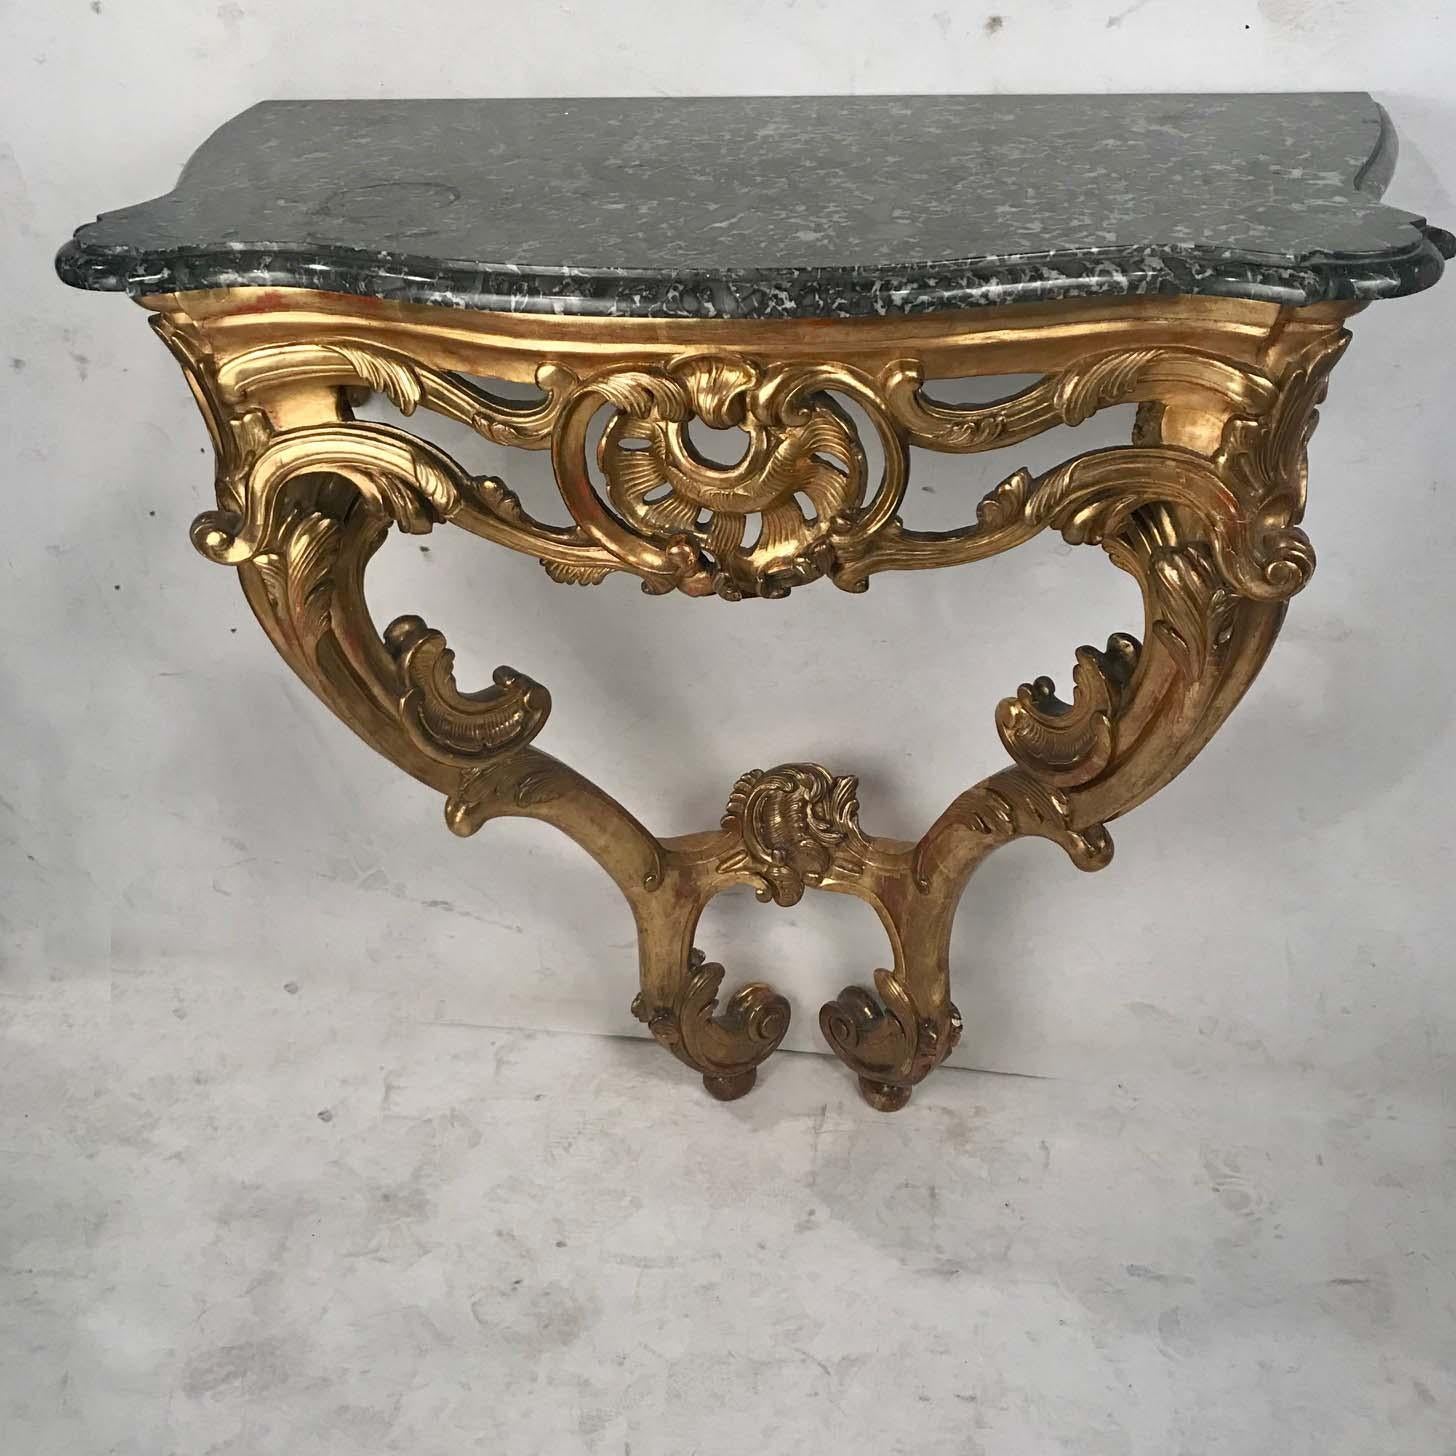 A Louis XV style giltwood console table on two elaborately carved  supports, with well-carved leaf and scroll decoration; the curving and sinuous acanthus motif adds a lightness and movement.
Surmounted by an eared and beveled Gris Saint-Anne marble